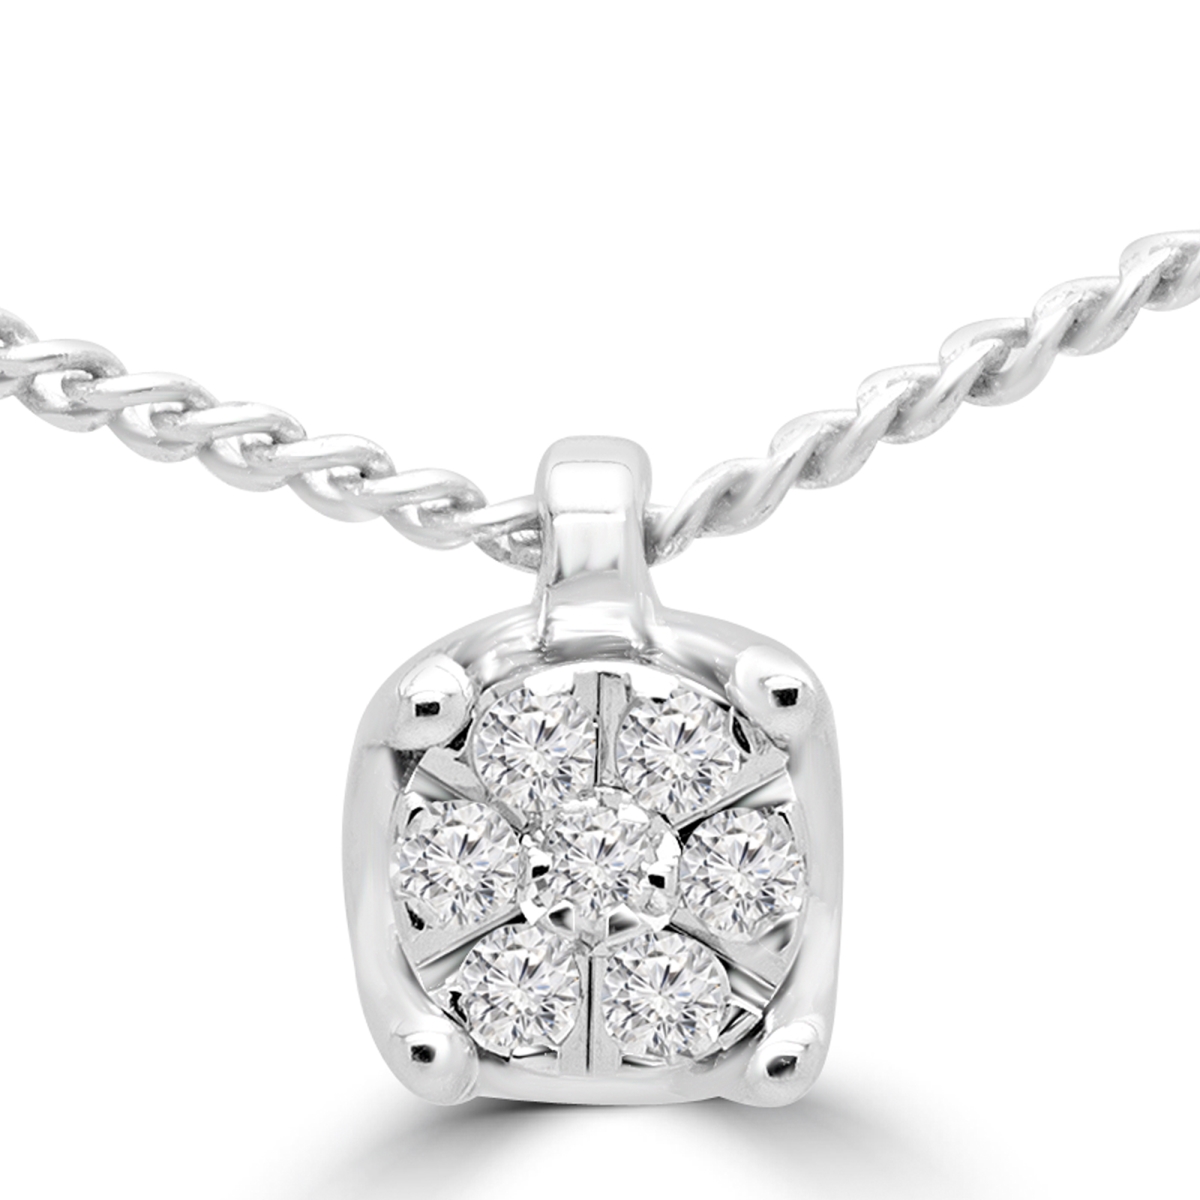 MDR180019 0.05 CTW Round Diamond Cluster Pendant Necklace in 10K White Gold With Chain -  Majesty Diamonds